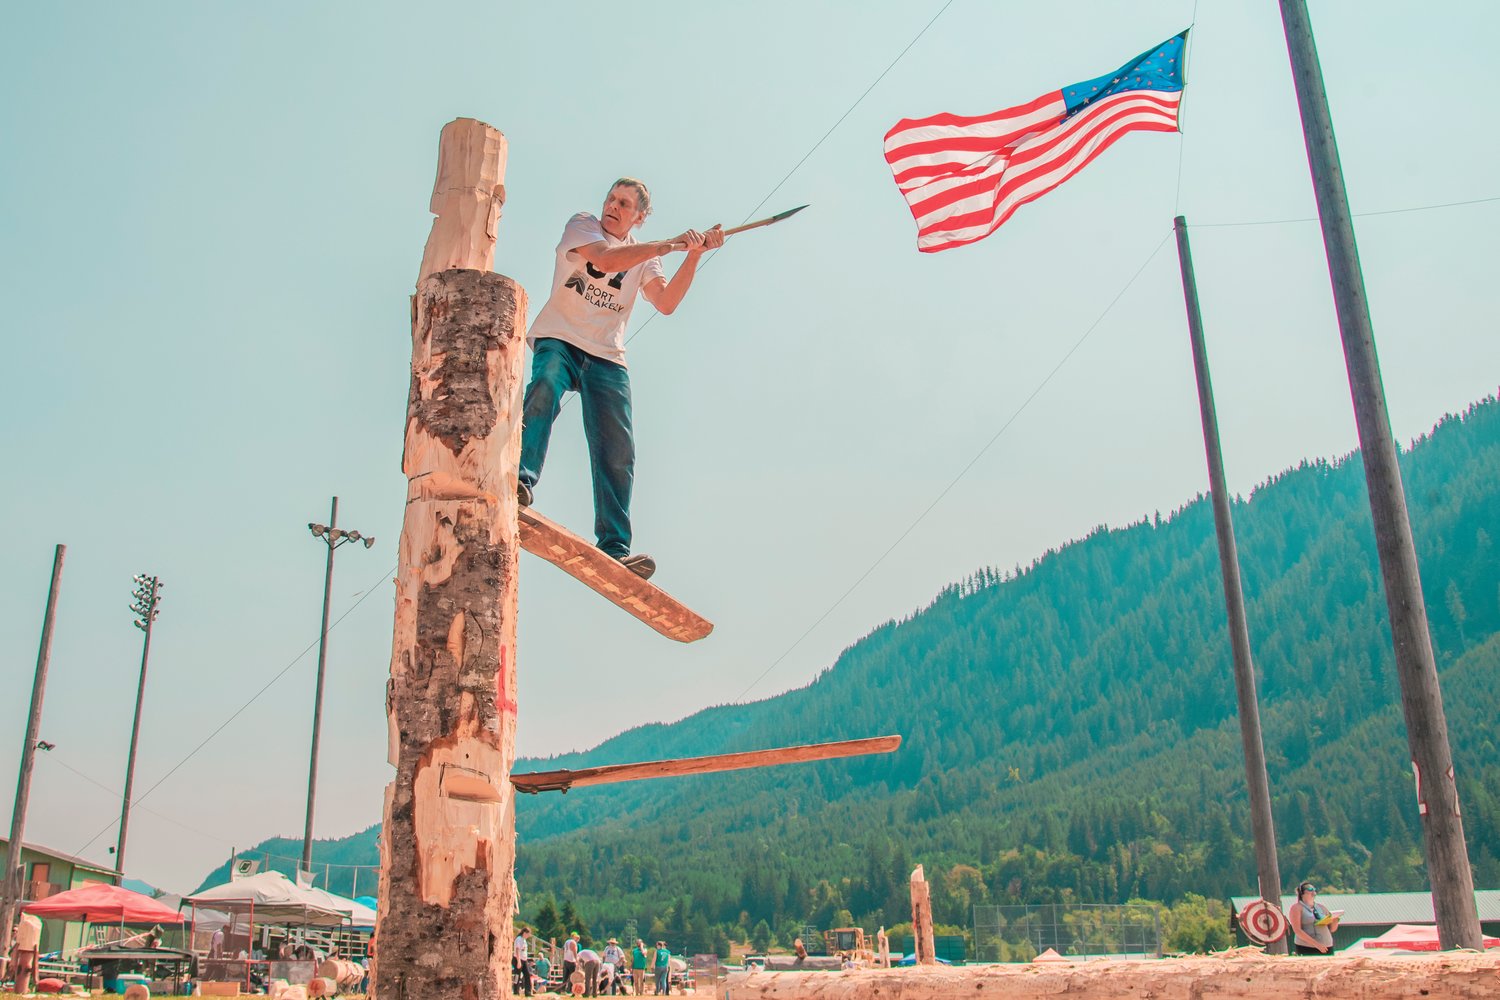 Eyler Adam stands on a springboard while competing during the Morton Loggers' Jubilee in August 2021.